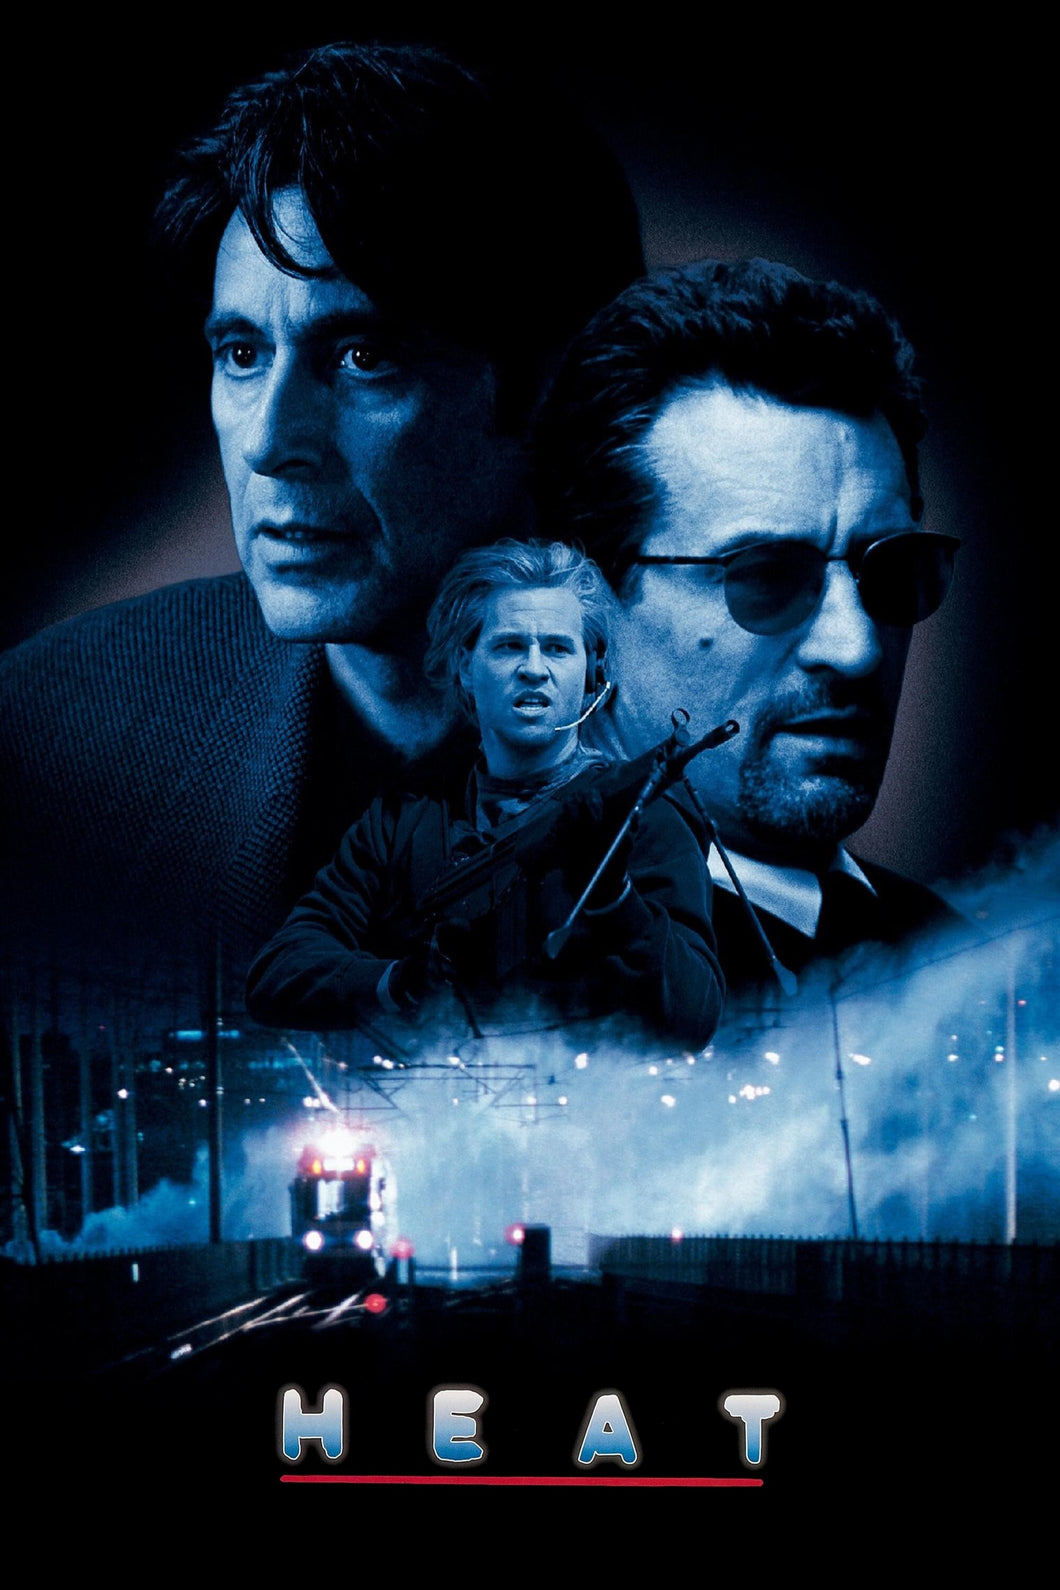 Heat (1995) Movie Poster High Quality Glossy Paper A1 A2 A3 A4 A3 Framed or Unframed!!!